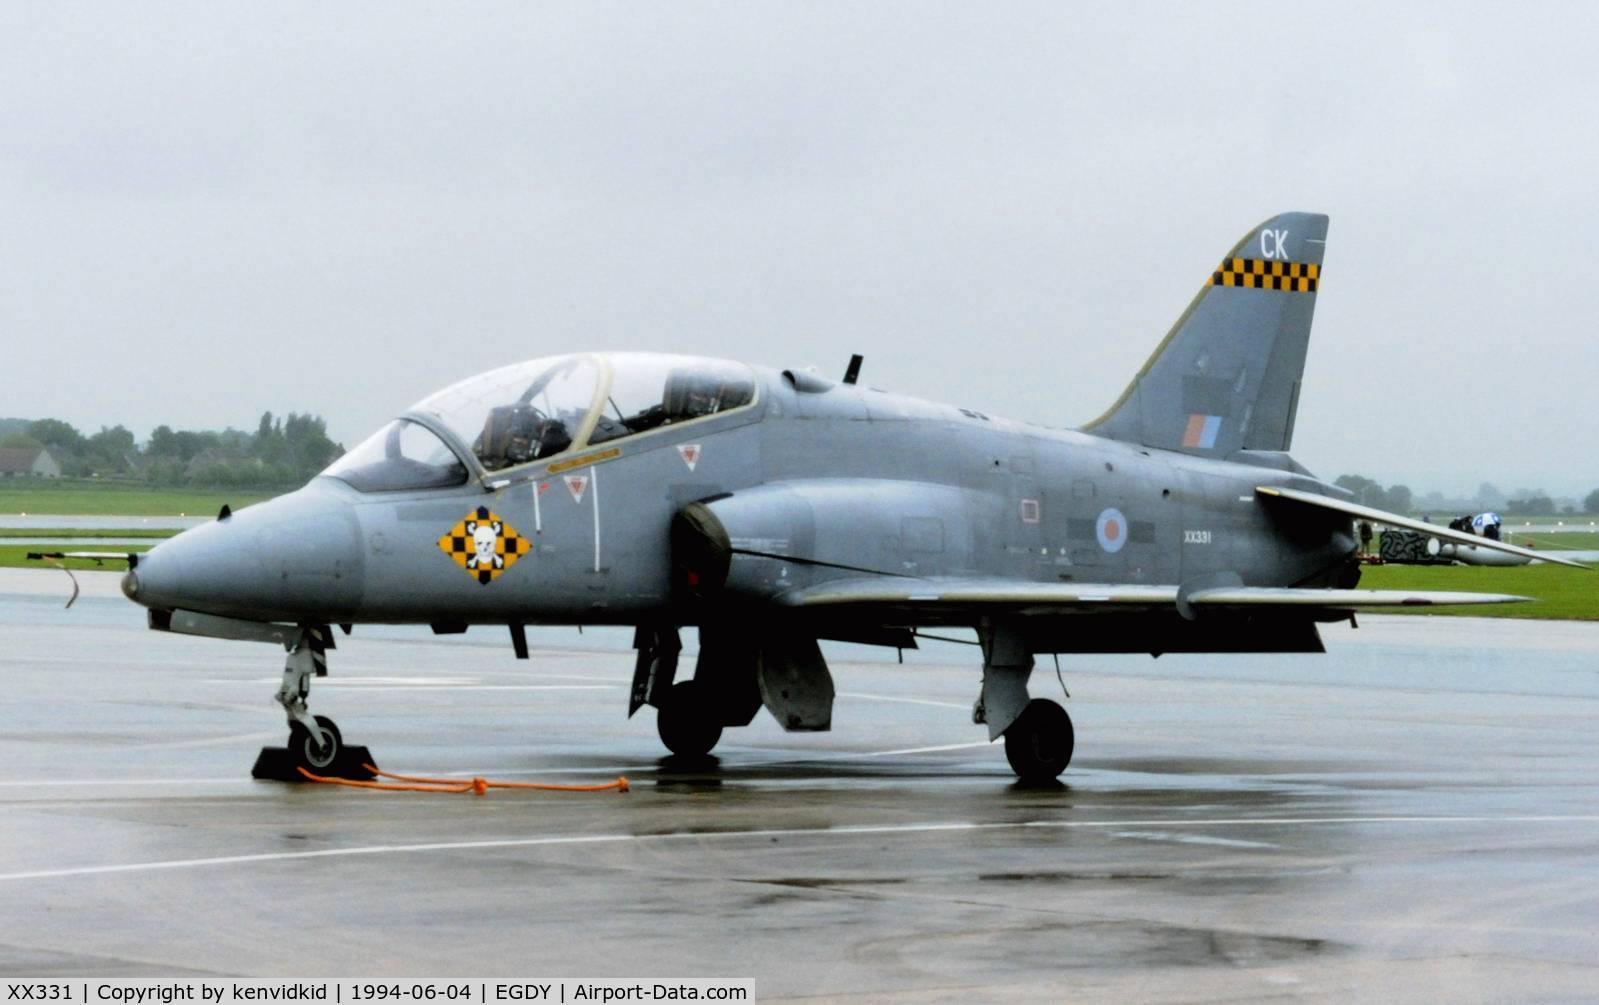 XX331, 1980 Hawker Siddeley Hawk T.1A C/N 177/312155, On static display at the RNAS Yeovilton 1994 50th Anniversary of D Day photocall. It rained all day.